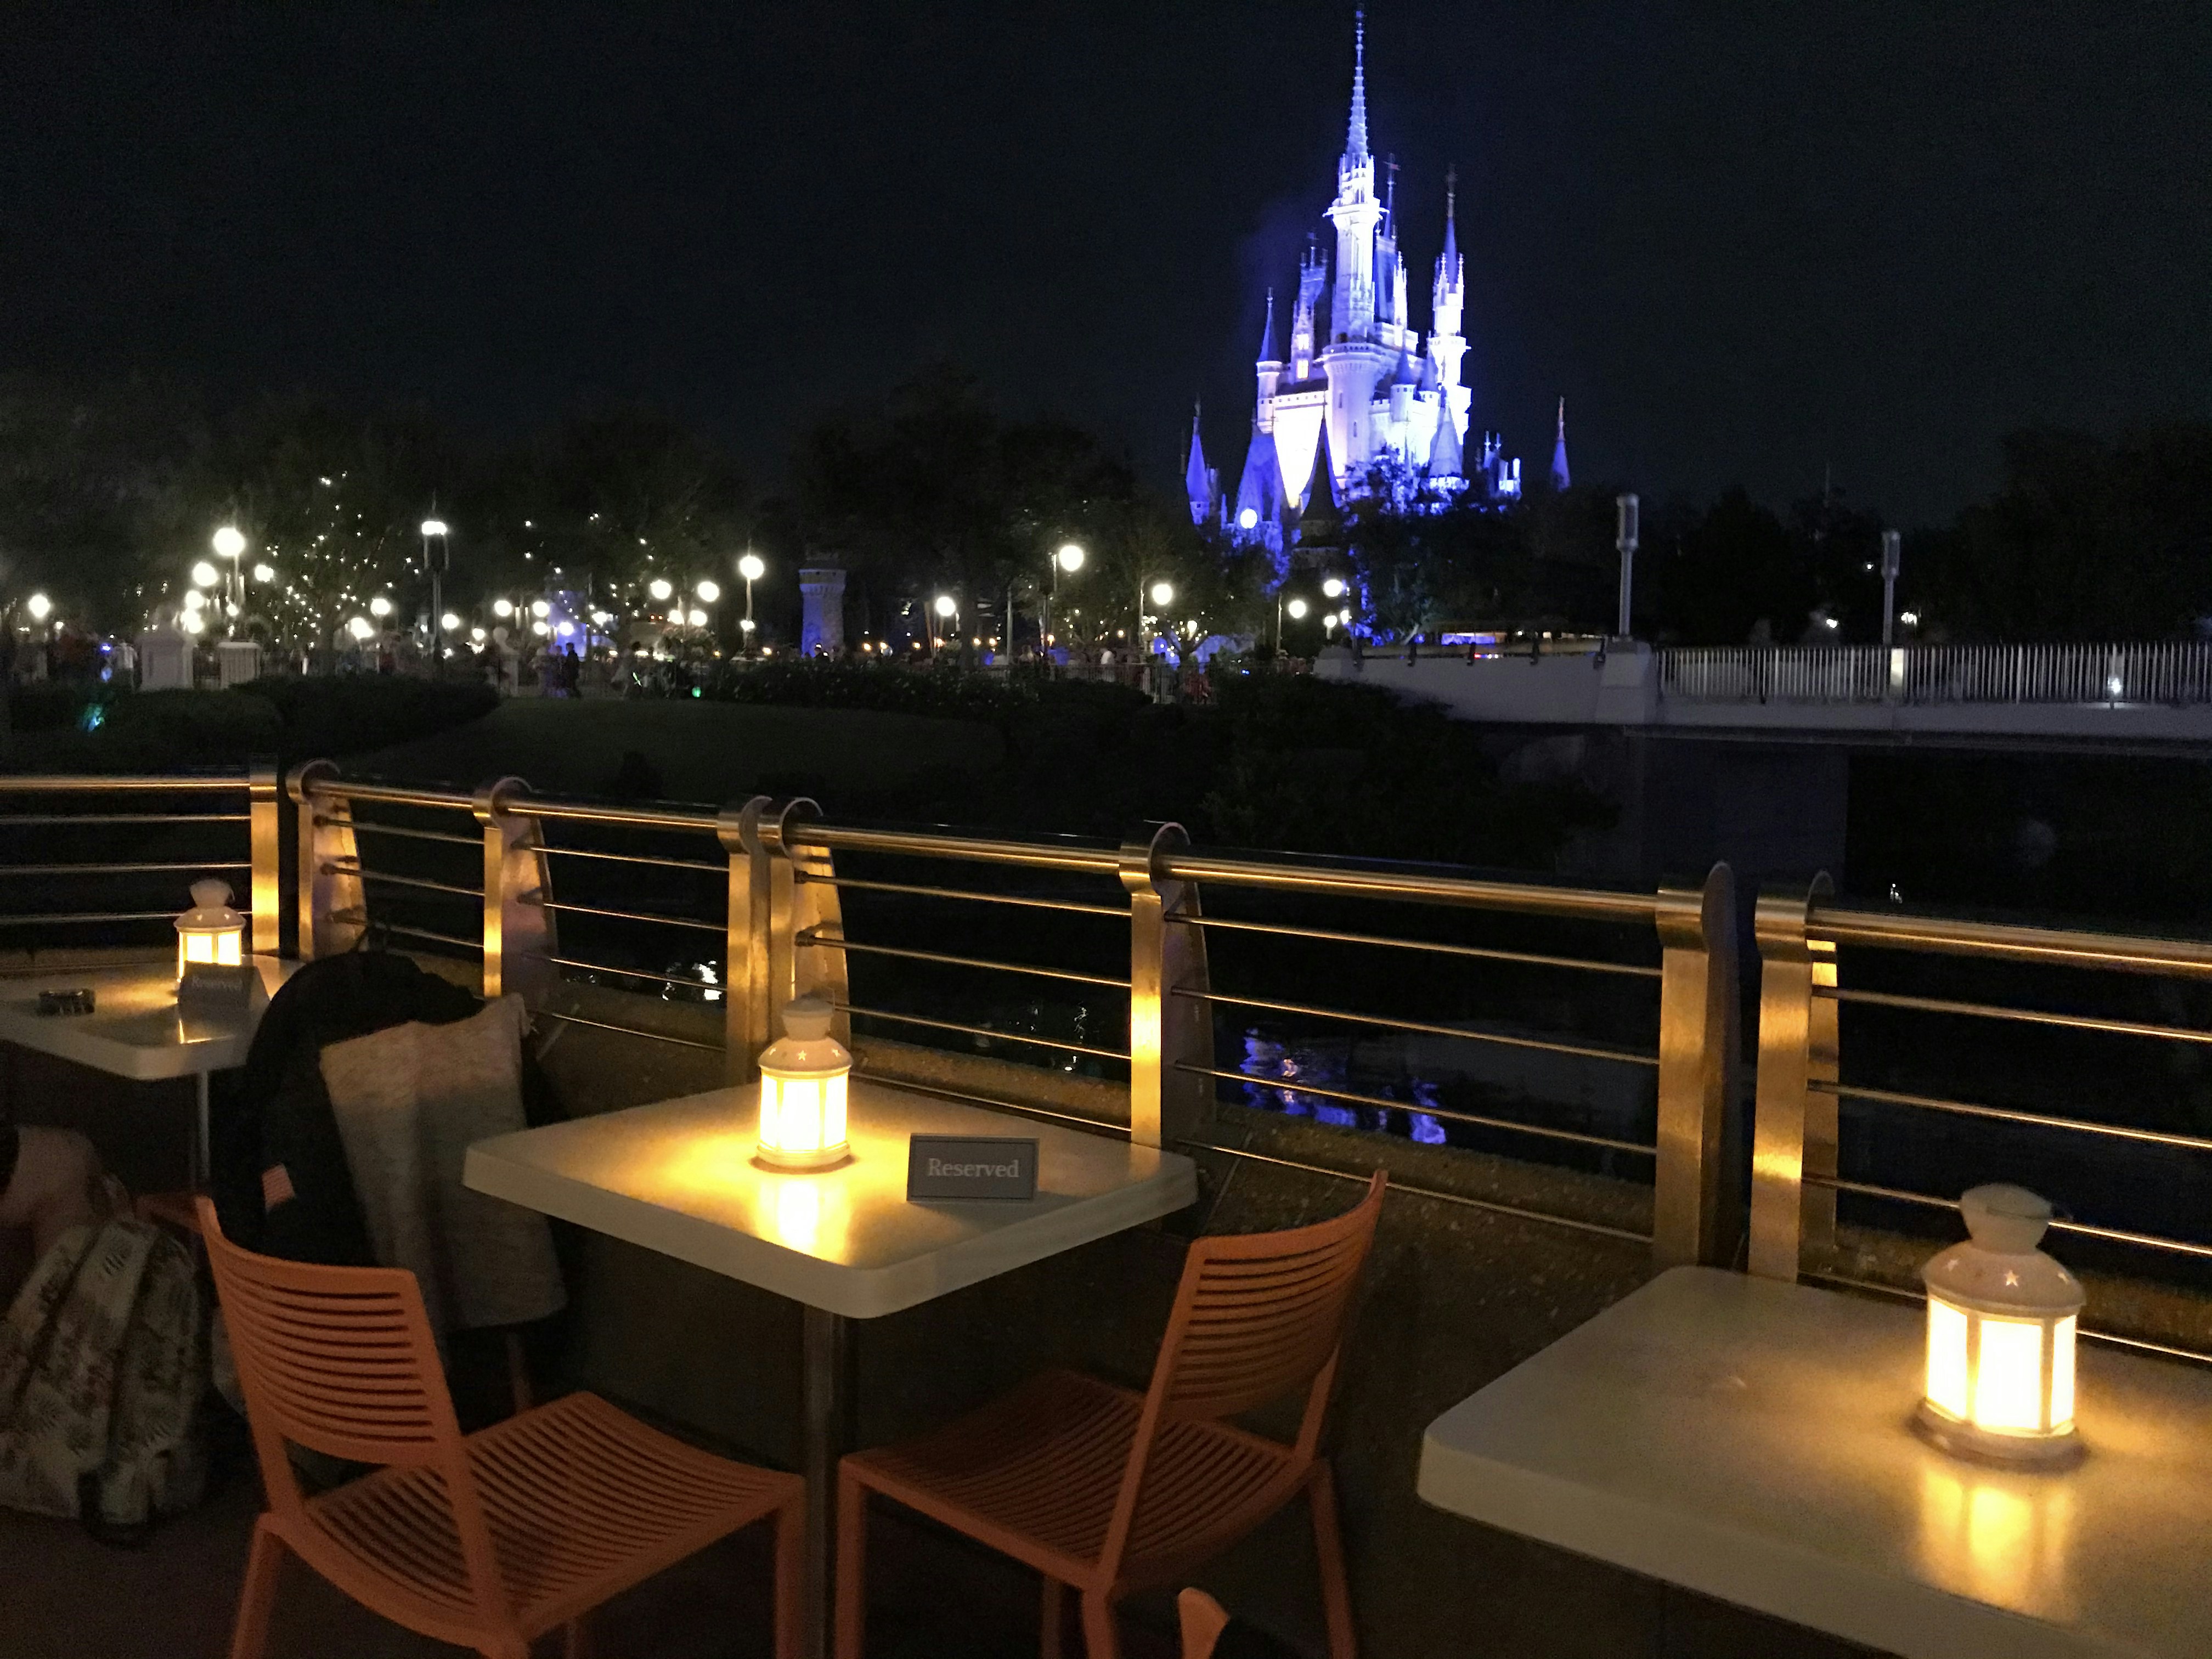 1nNlLibe tomorrowland terrace dessert party with alcohol happily ever after magic kingdom feb 2020 196.jpeg?auto=compress%2Cformat&ixlib=php 1.2